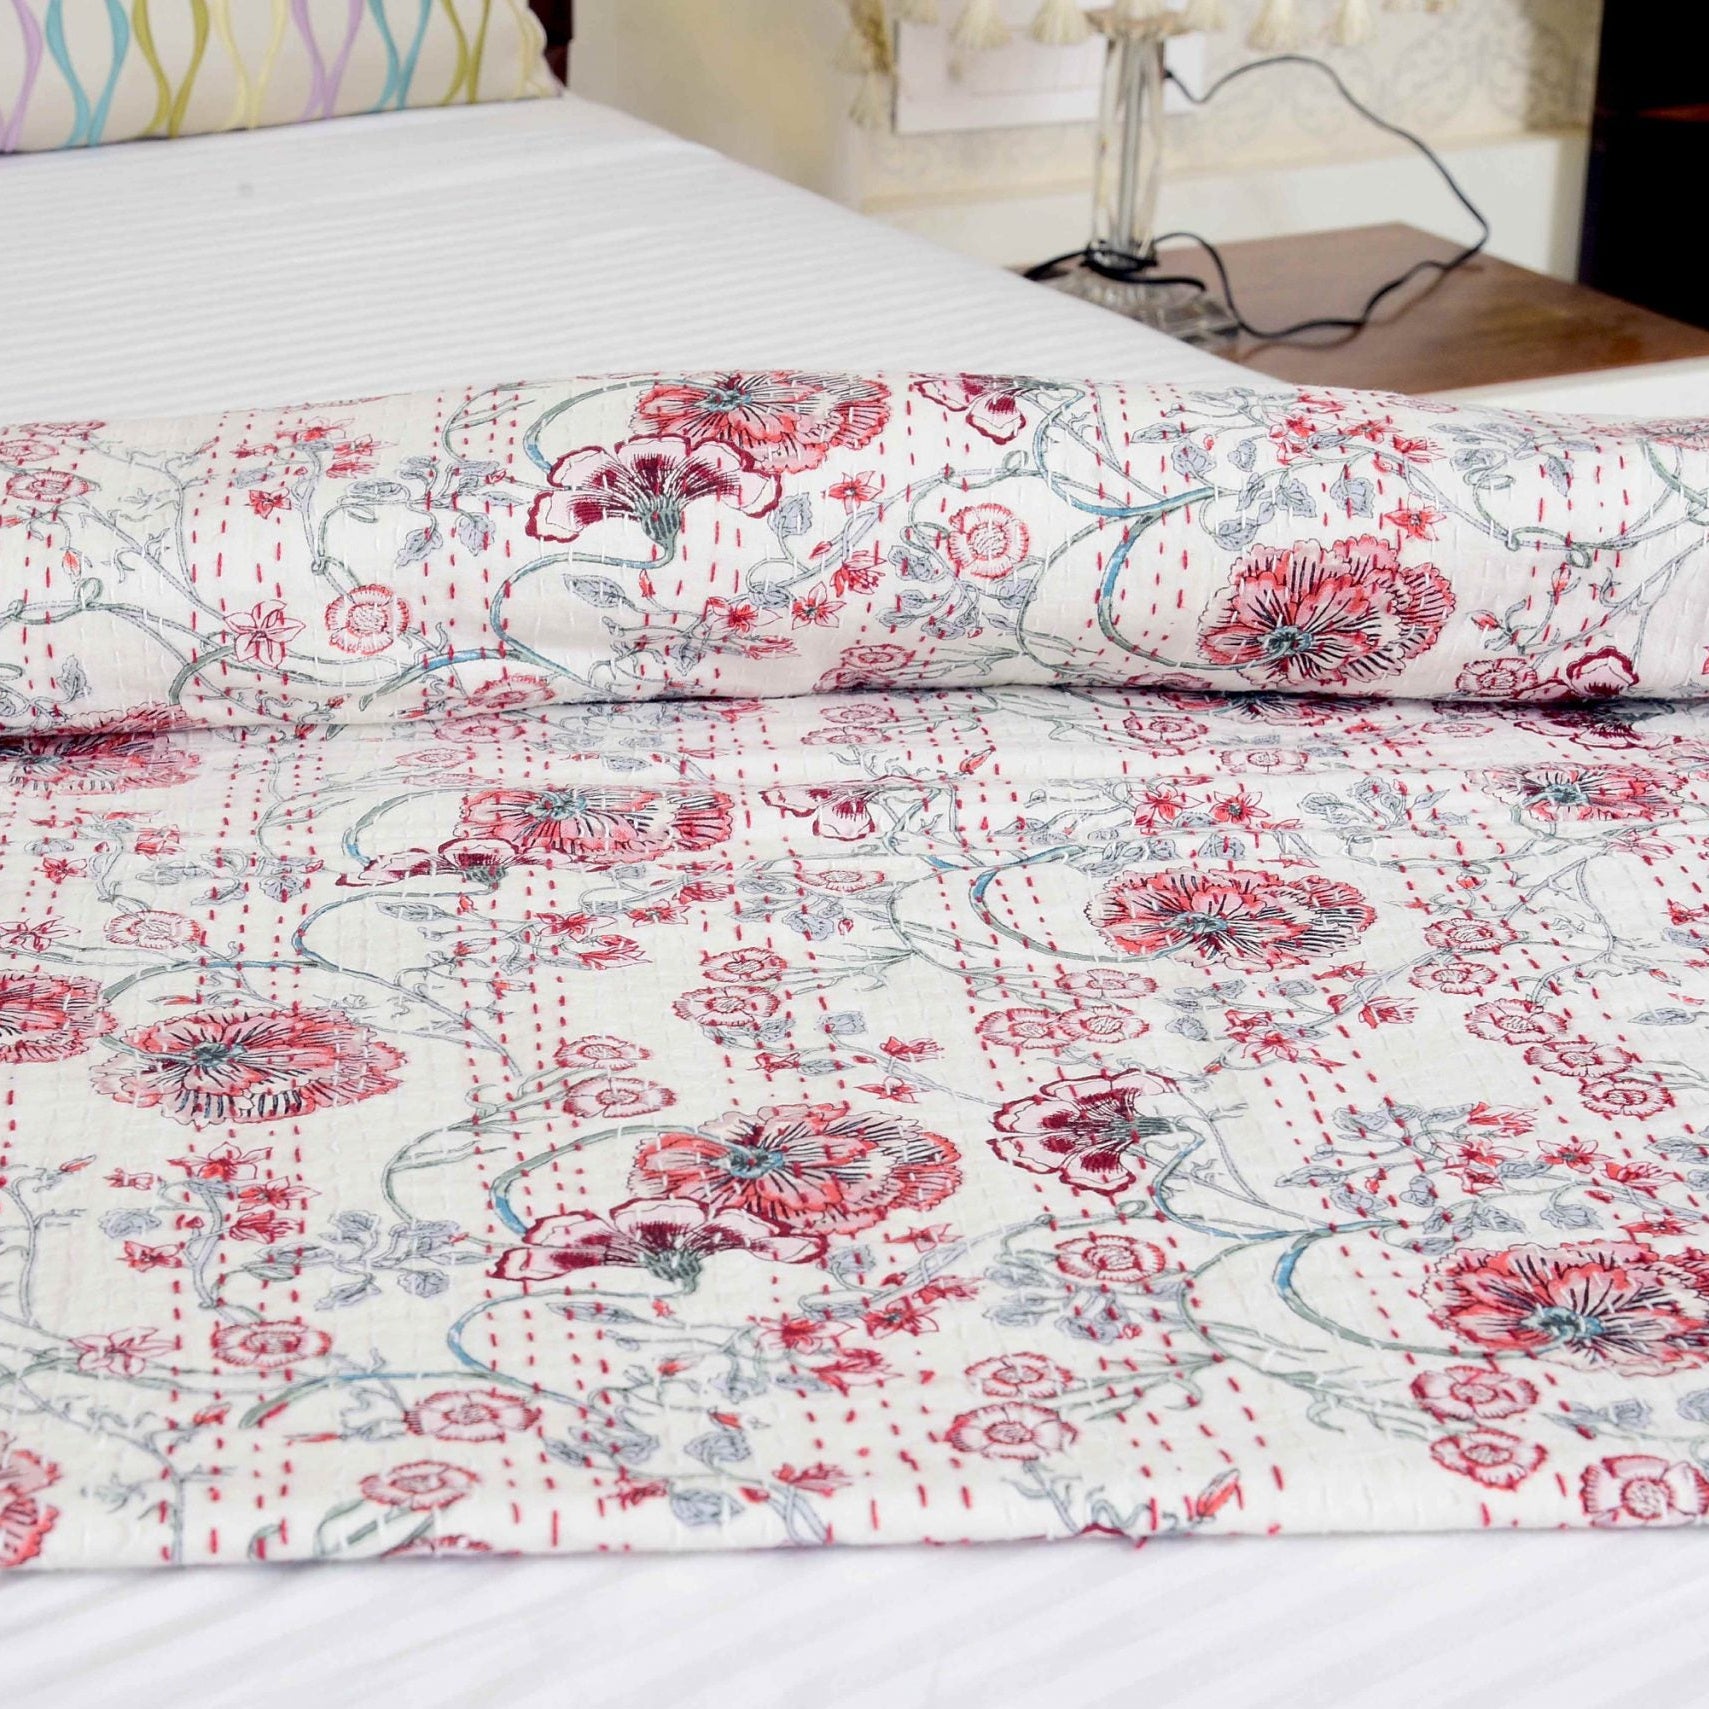 Linen Connections Handmade Indian Kantha Quilt - White Pearl